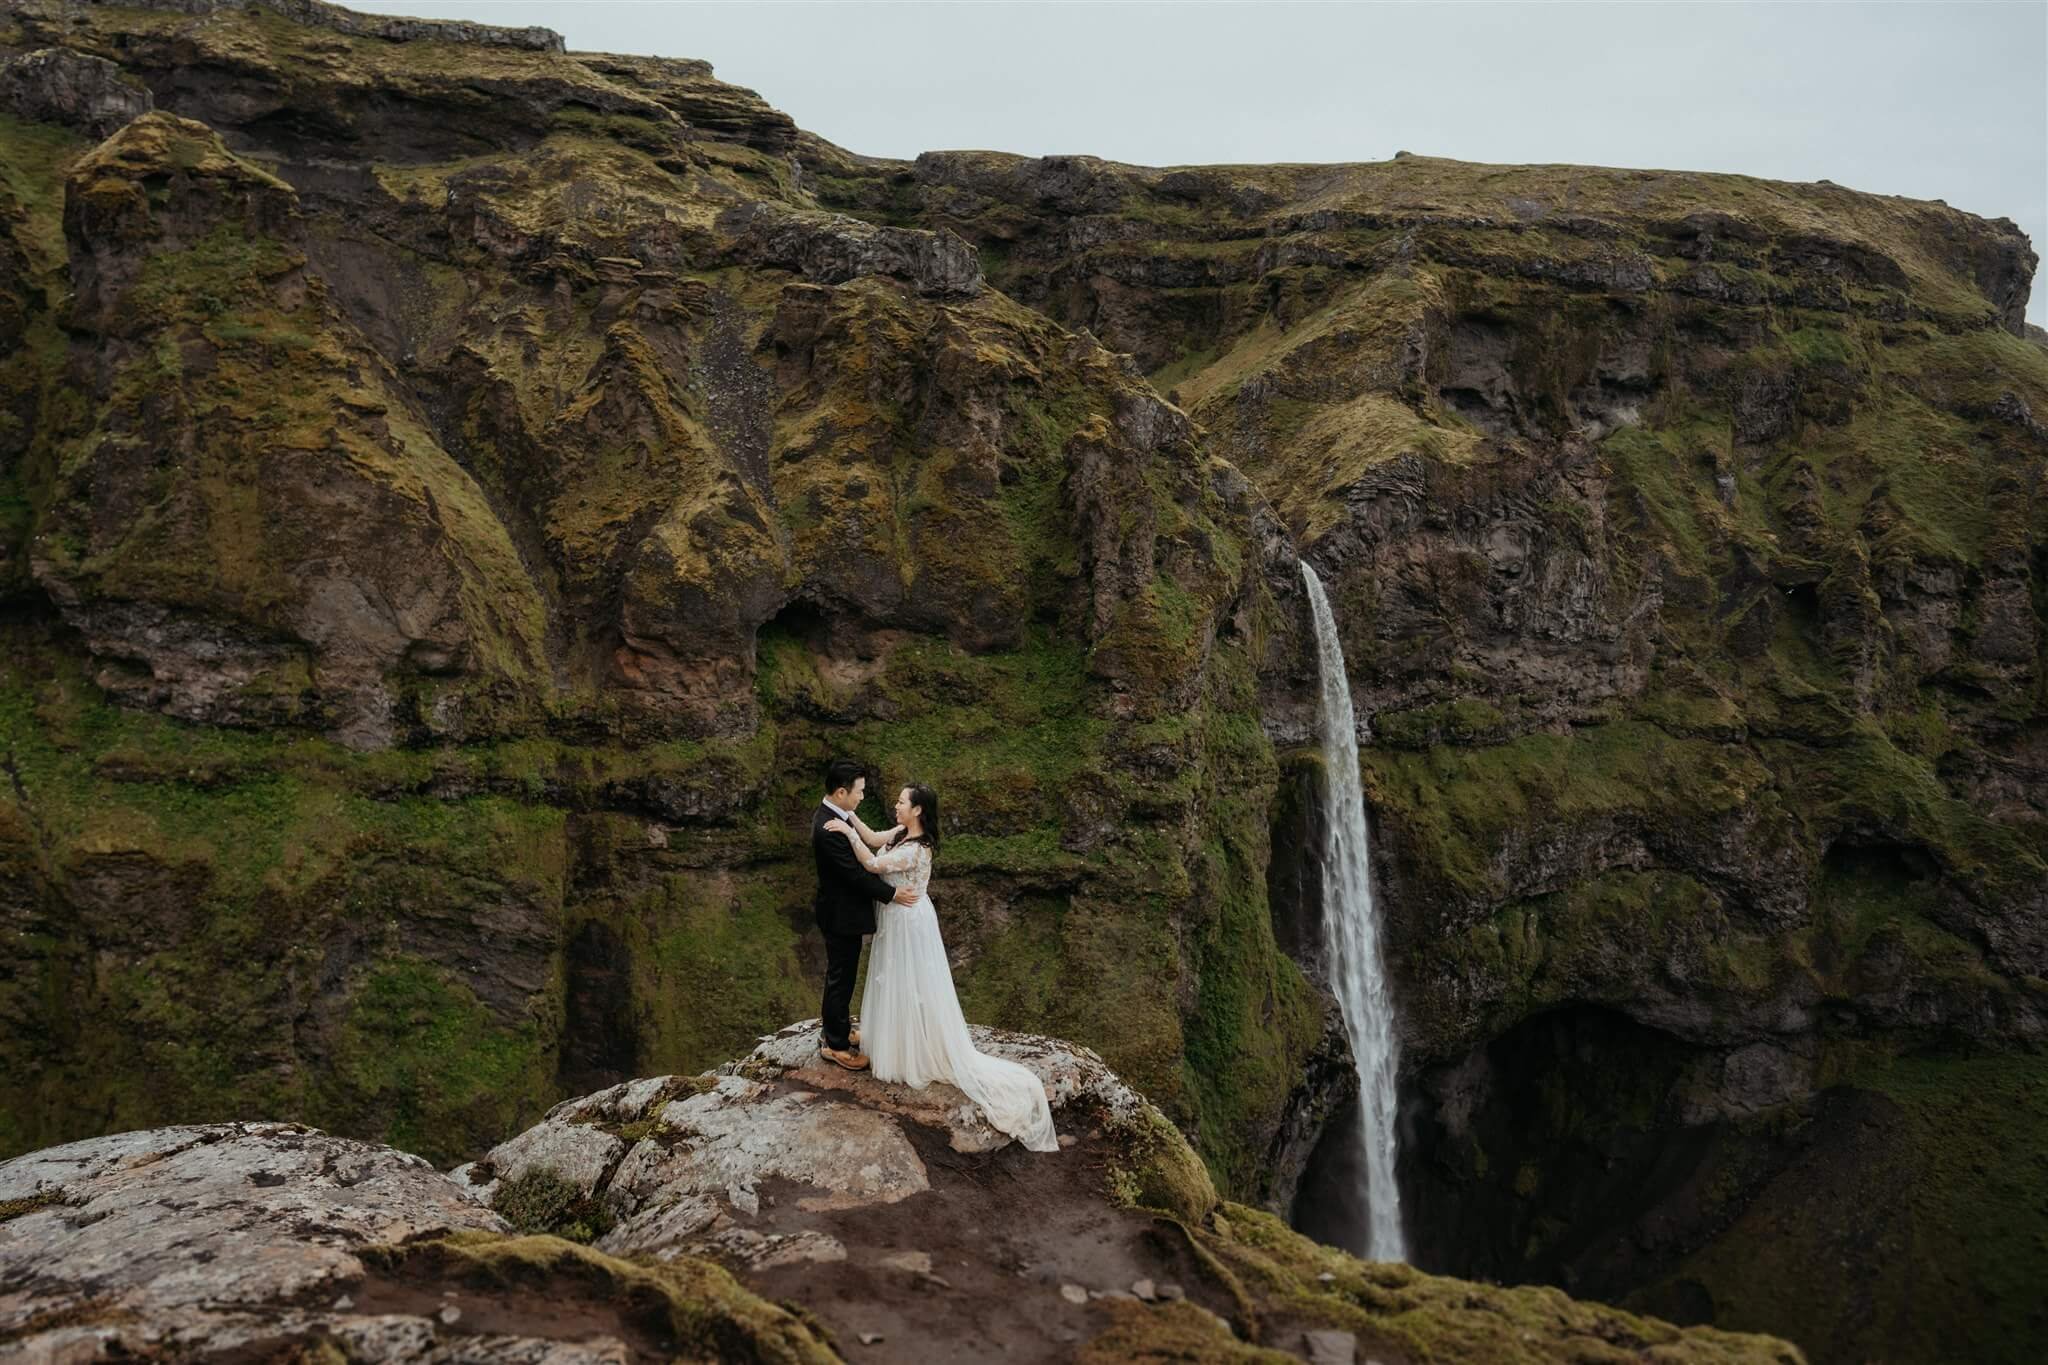 Bride and groom kiss in front of a waterfall during elopement in Iceland